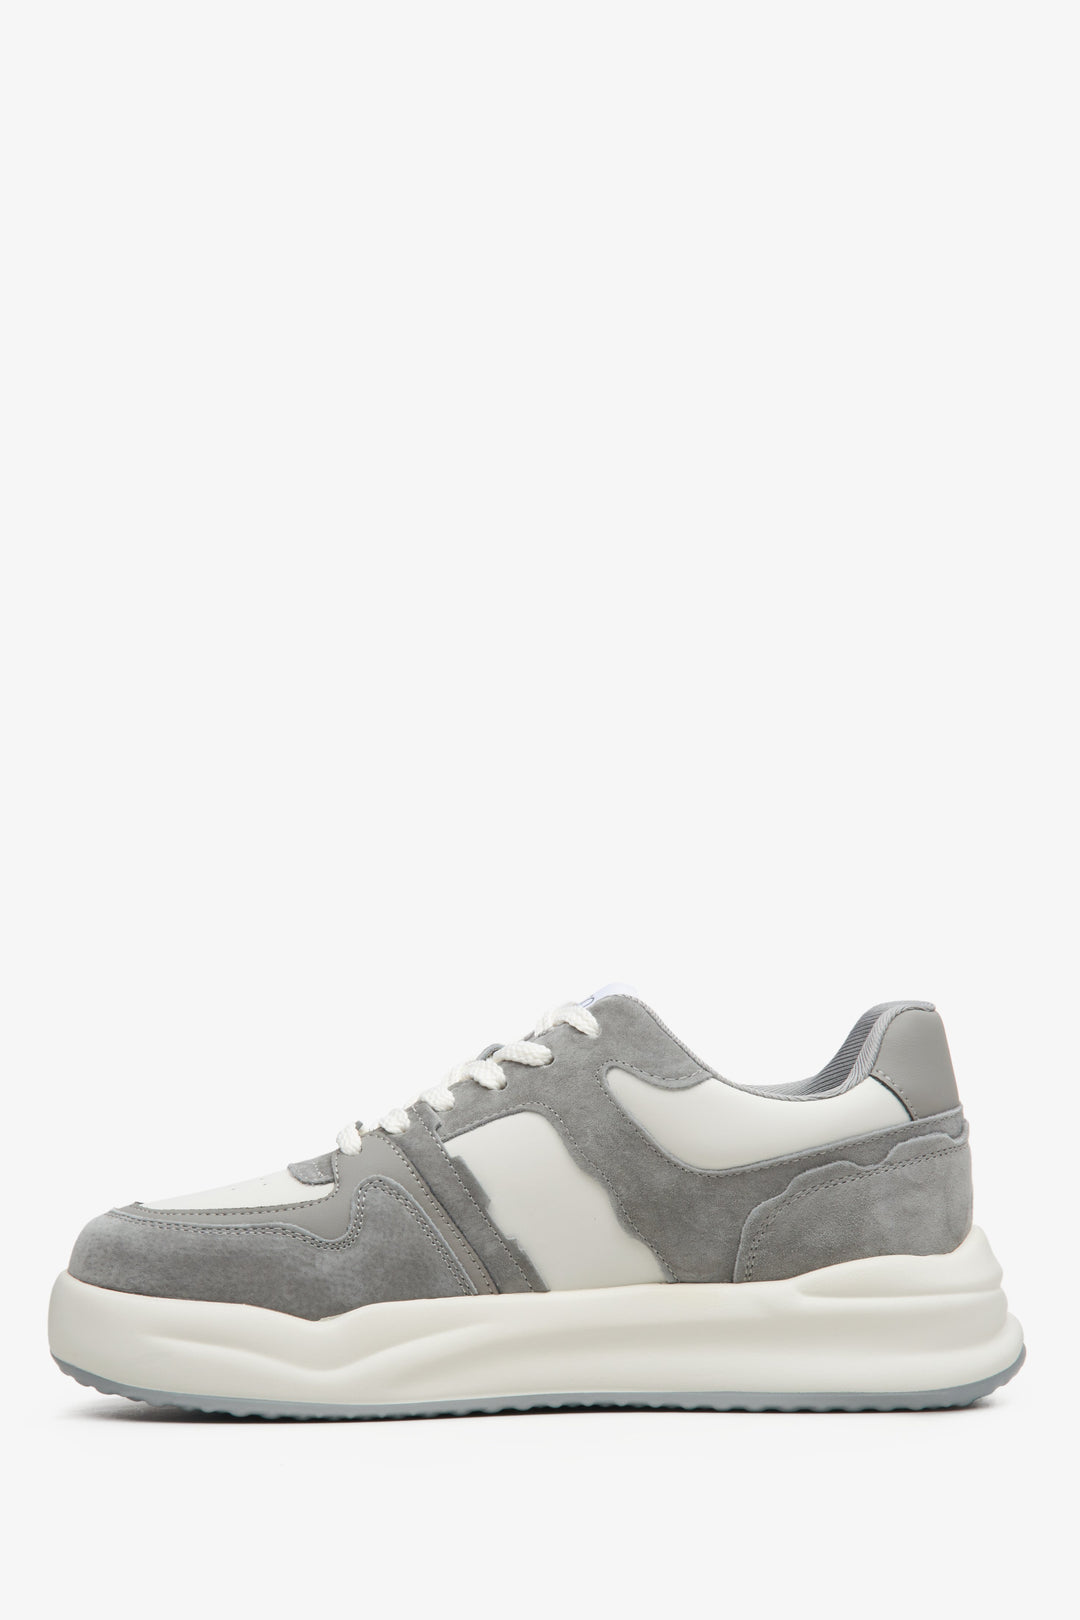 Women's grey and white sneakers made of leather and velour.